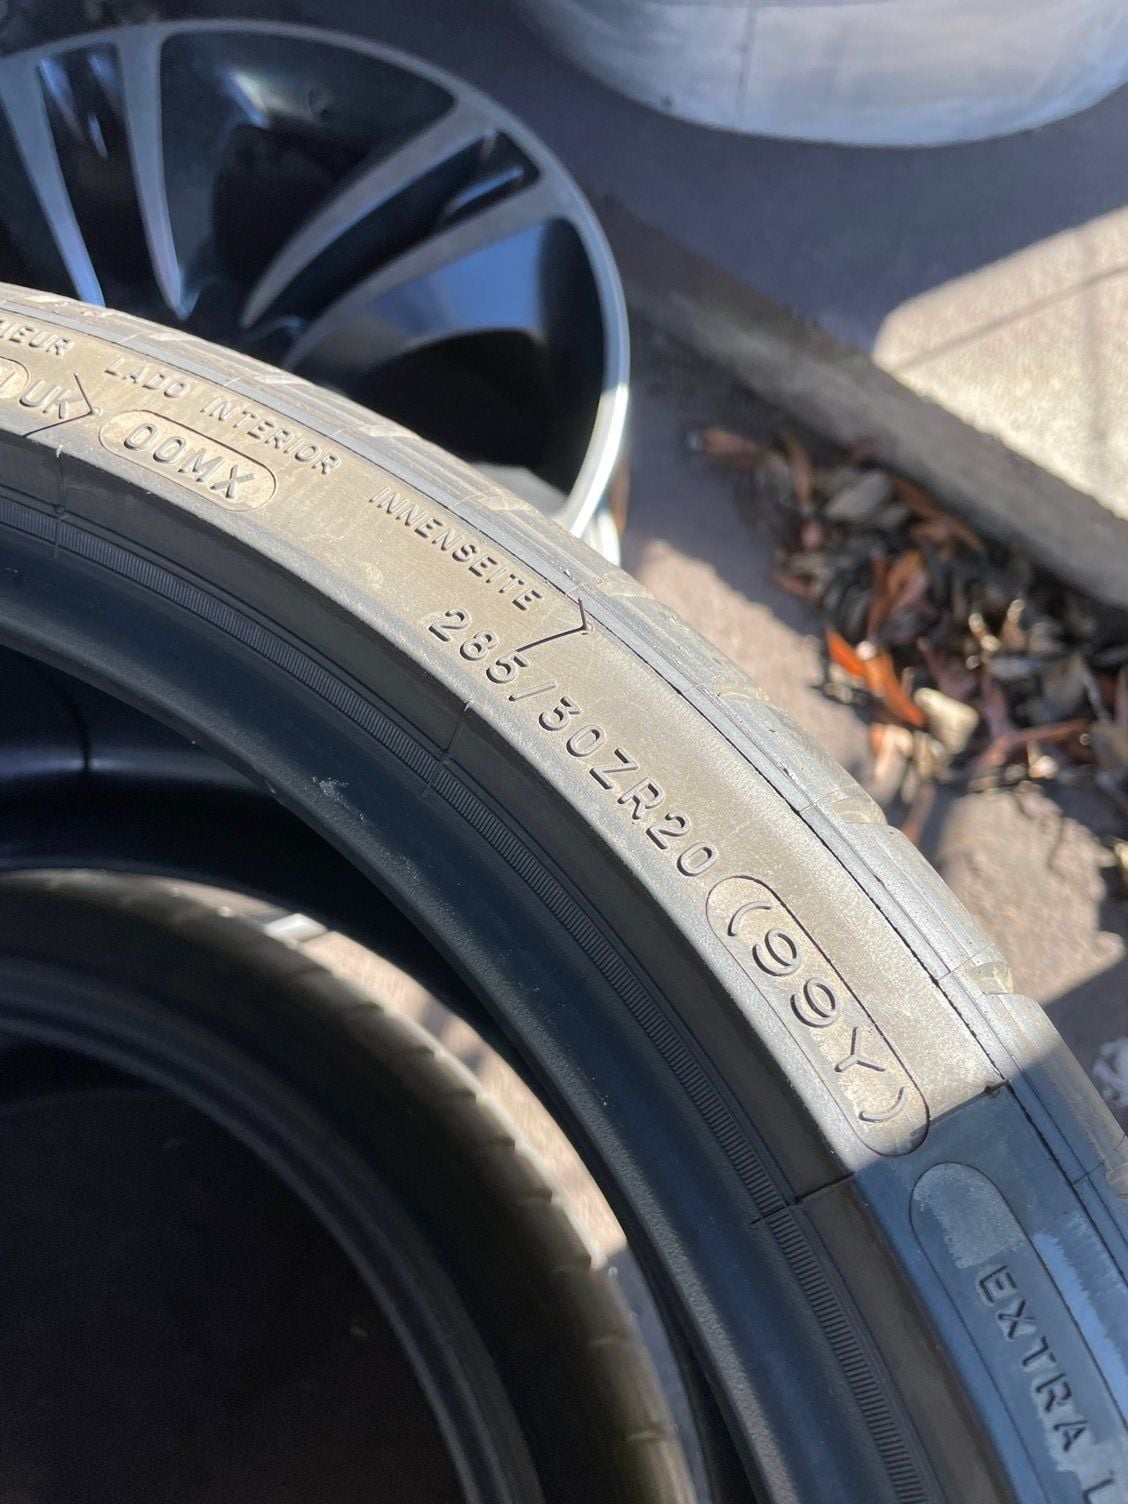 Wheels and Tires/Axles - Mercedes C63 AMG Michelin Cup 2 TIRES 255/35/19 & 285/30/20 Delivery Miles - New - 2017 to 2021 Mercedes-Benz C63 AMG S - Charlotte, NC 28202, United States